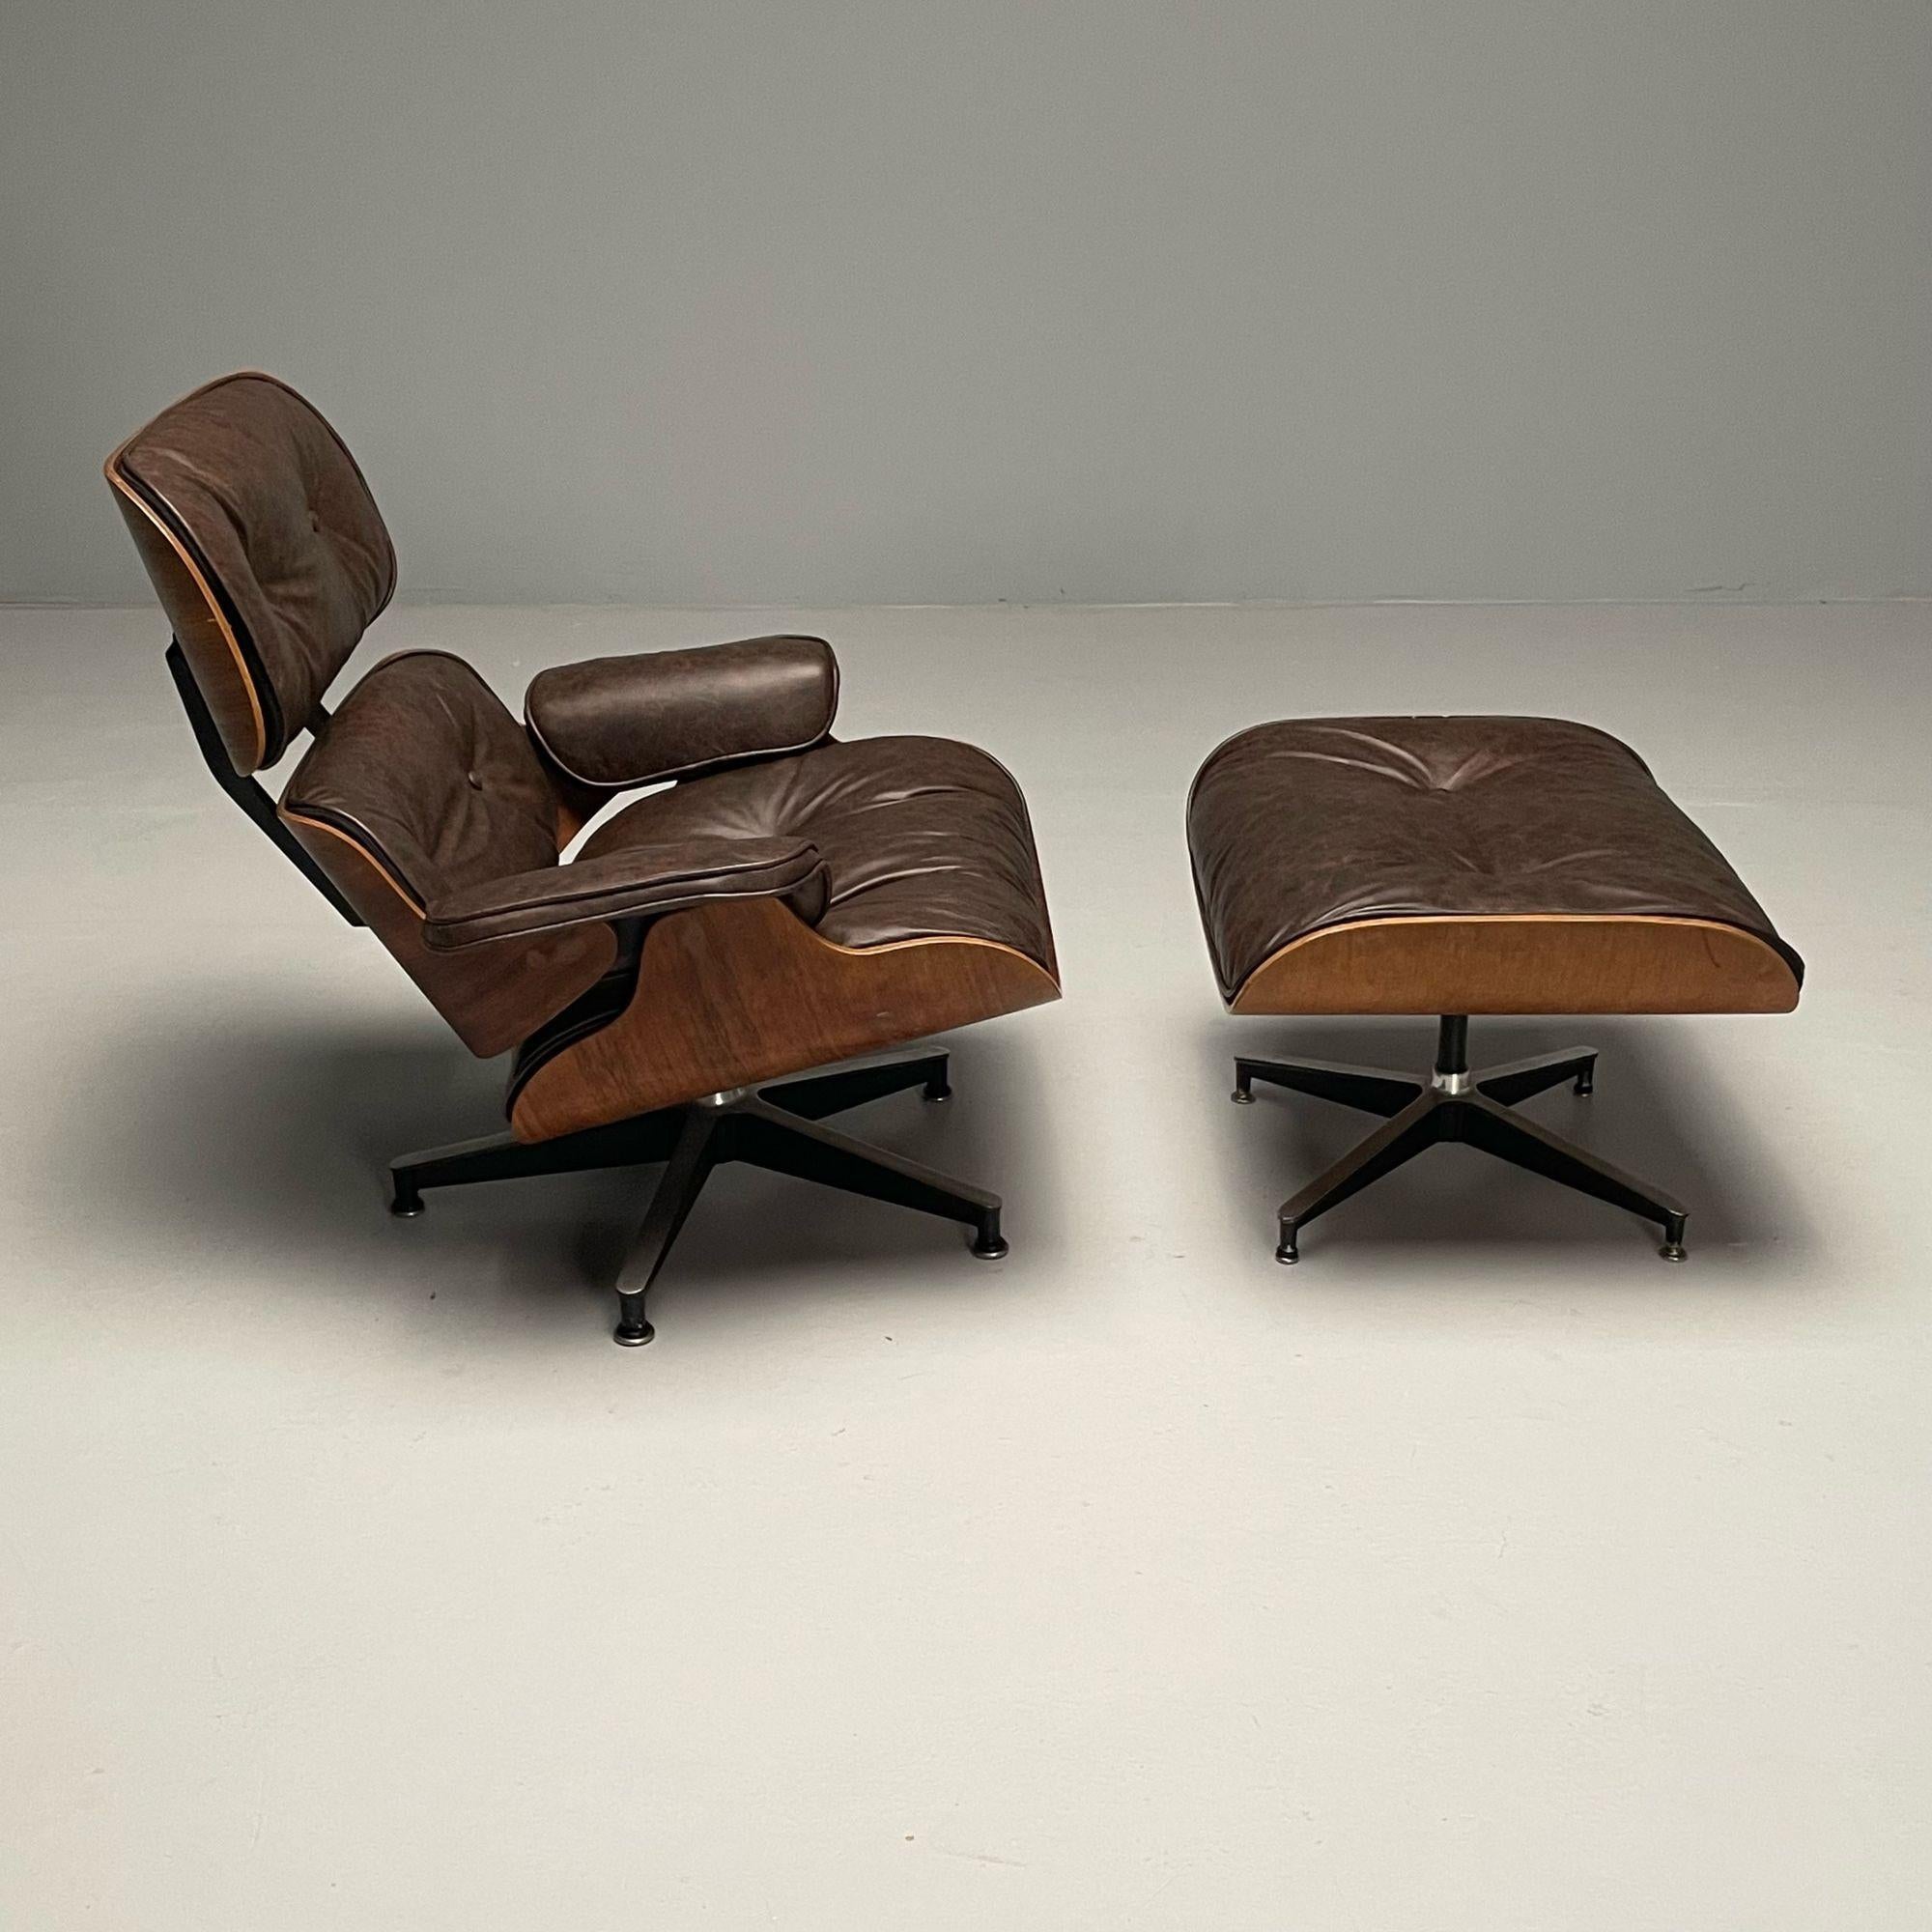 Herman Miller, Mid-Century Modern, Eames Lounge Chair, Ottoman, USA, 1960s

A vintage Herman Miller lounge chair with matching ottoman designed by Charles Eames (1907-1978) and Ray Eames (1912-1988). Iconic Mid Century Modern design with newly